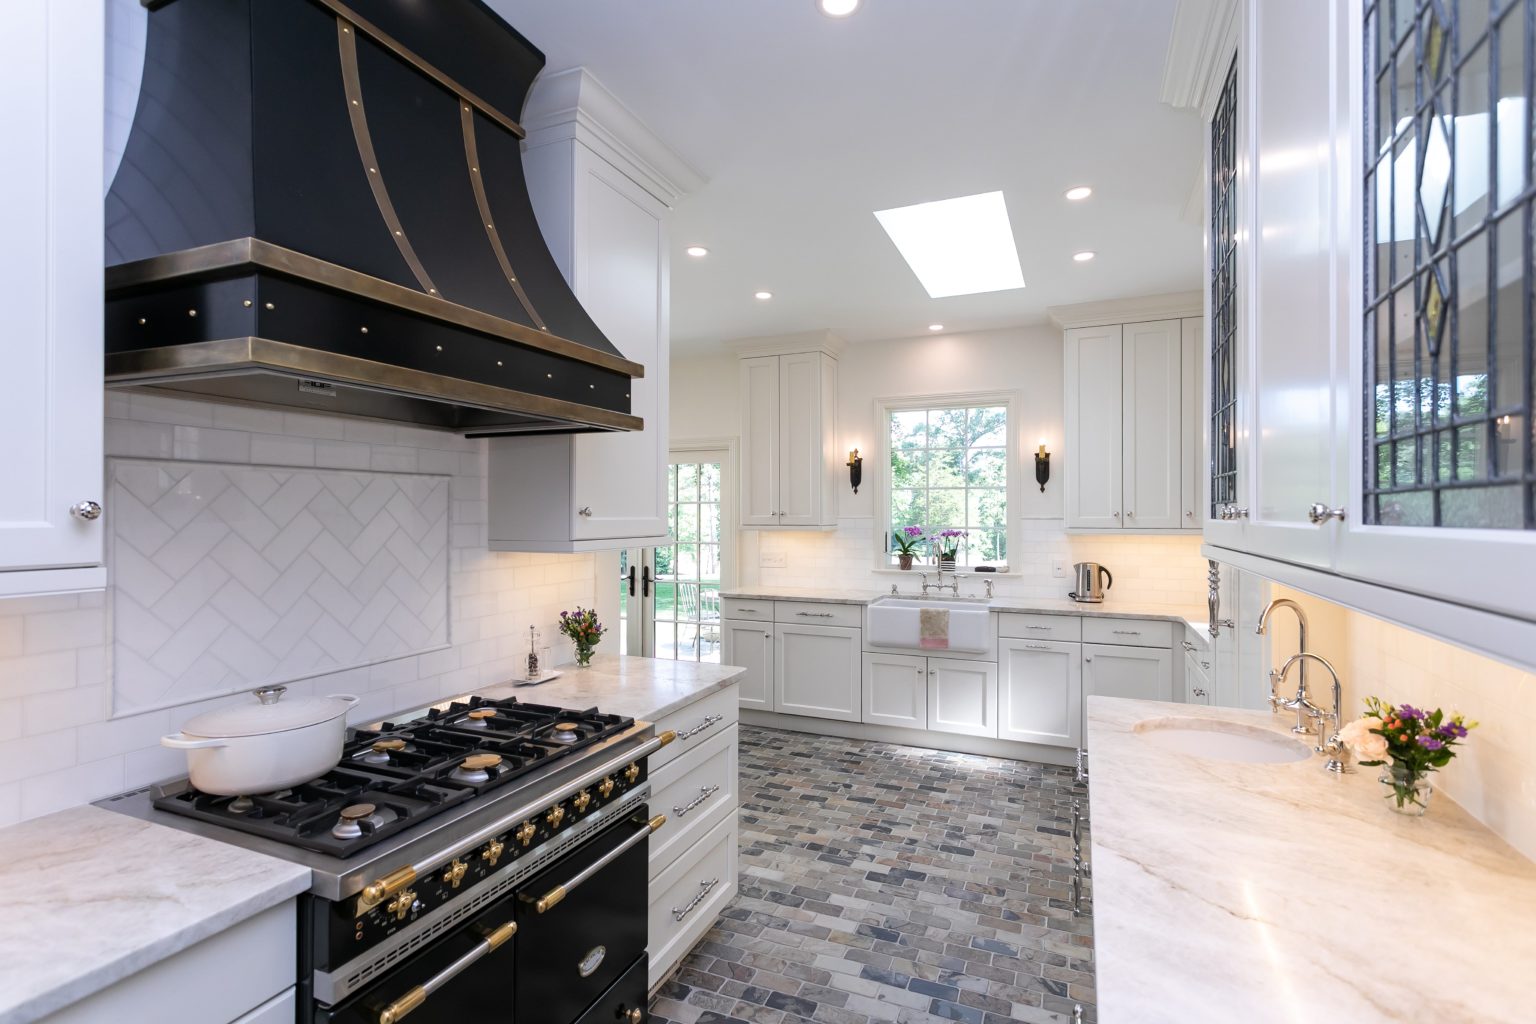 Kitchen Remodeling Contractors near me